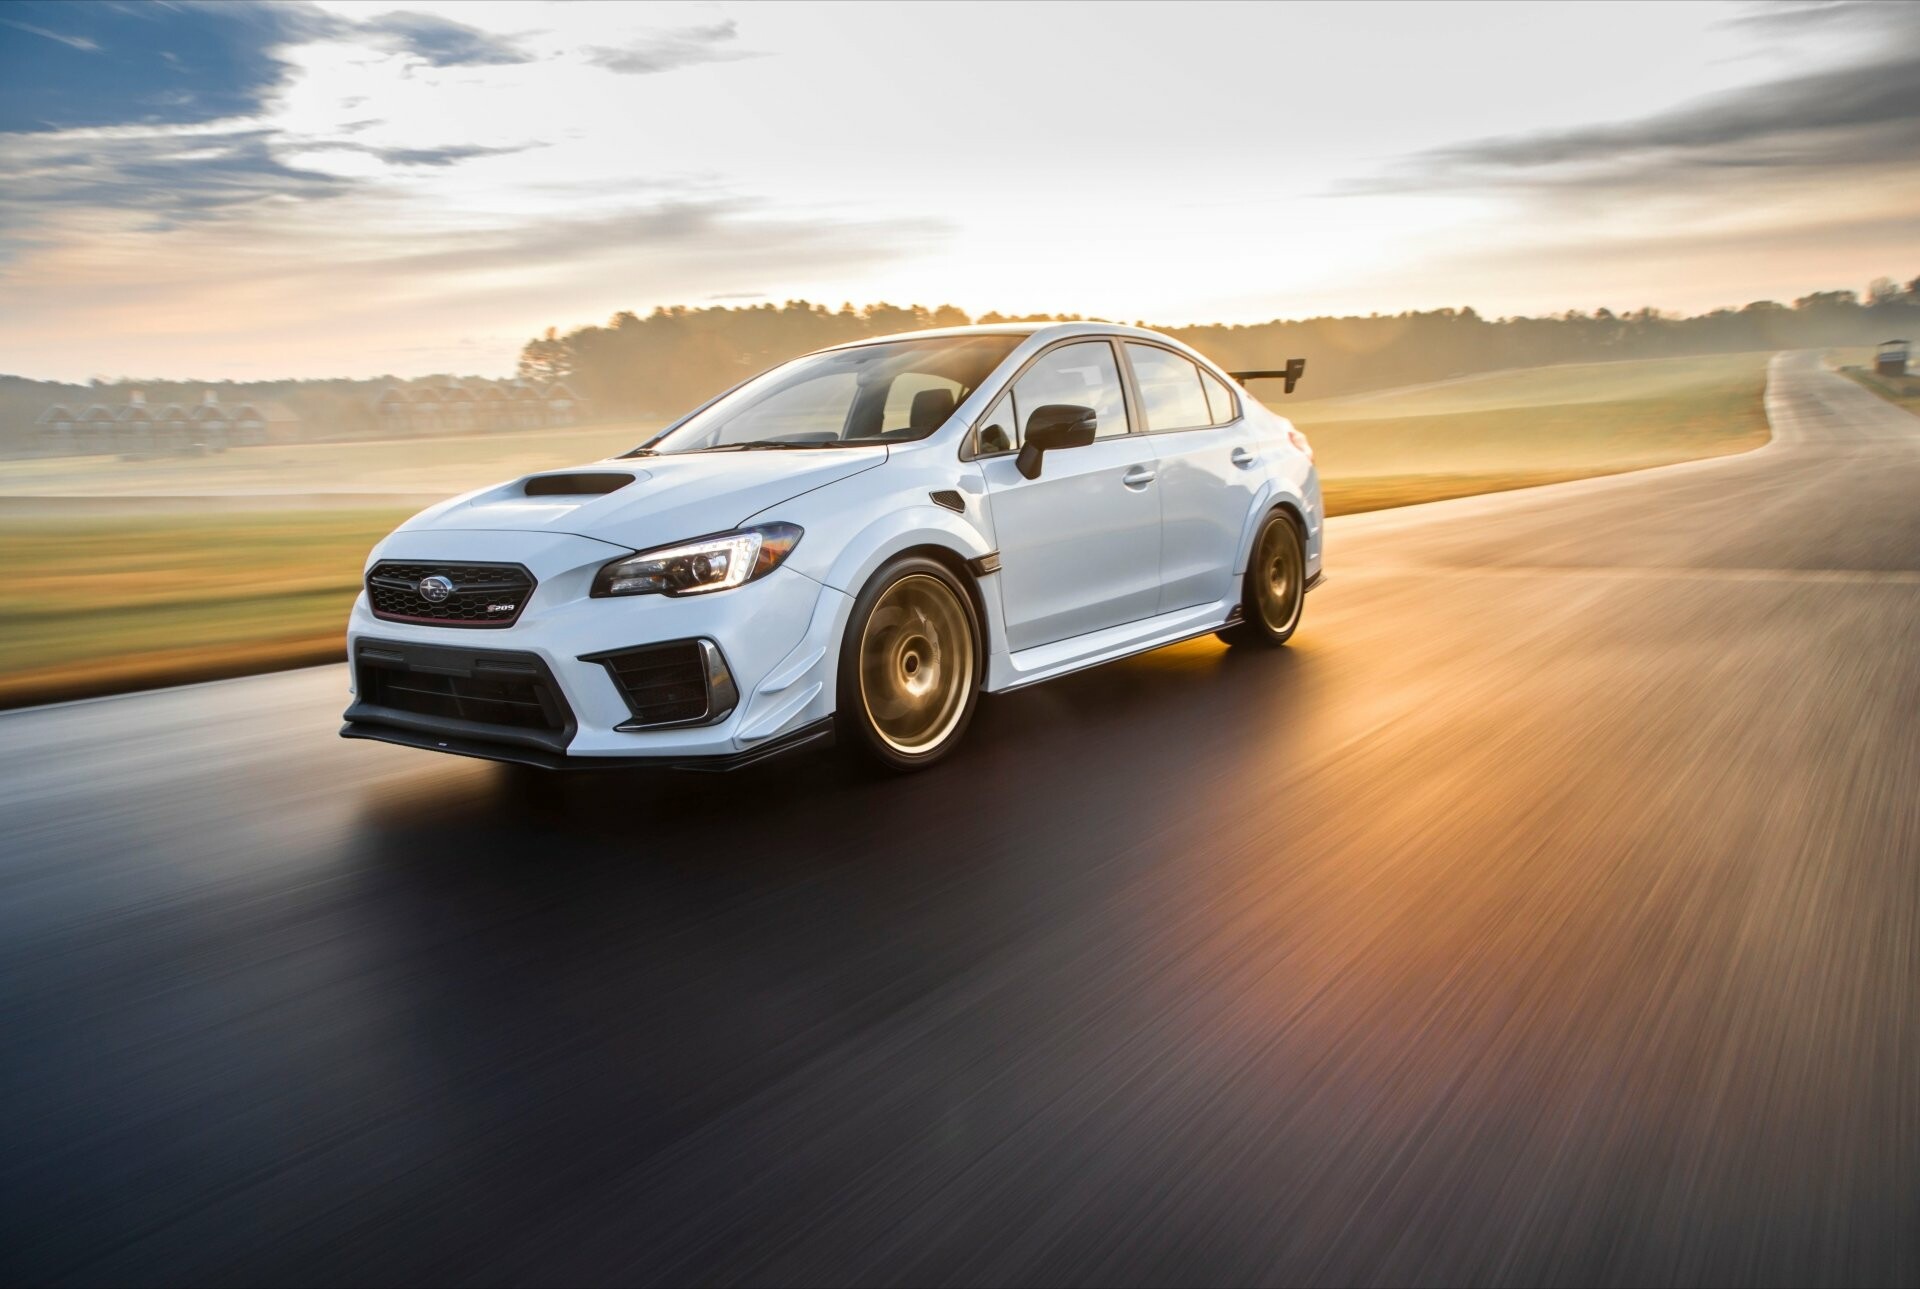 Subaru: All company cars, except the BRZ, come with a Symmetrical All-Wheel Drive system. 1920x1290 HD Wallpaper.